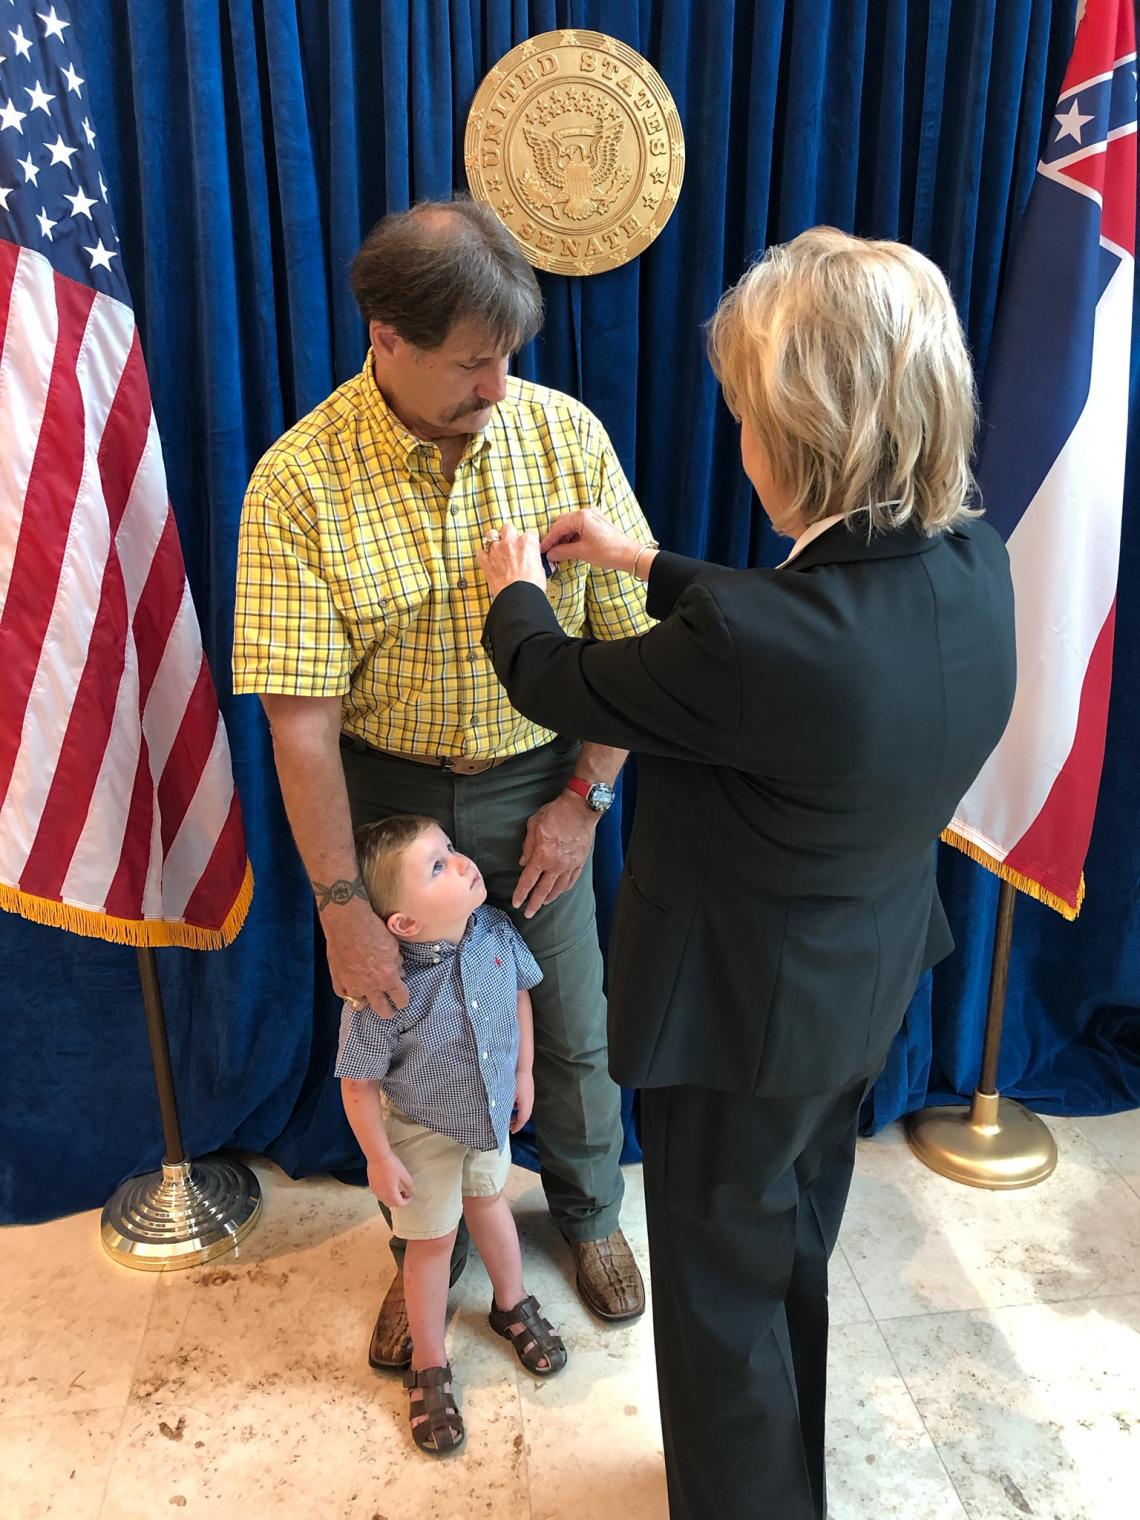 Senator Hyde-Smith presents John “Jay” Fulton Blount of Greenville with the Secretary of Defense Medal for the Defense of Freedom. (Aug. 20, 2019)